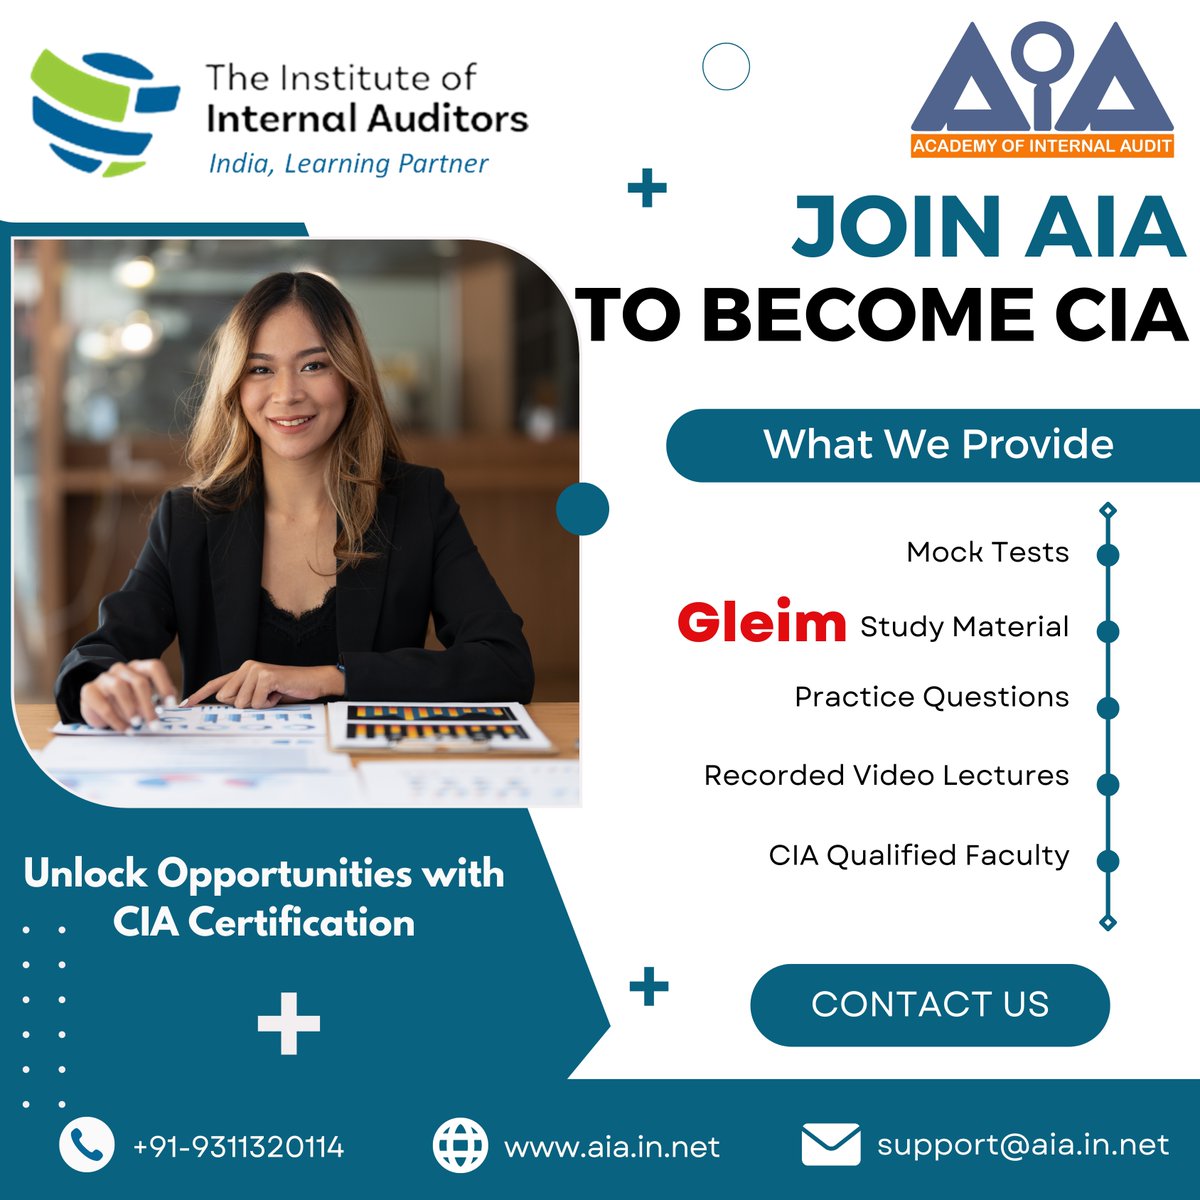 Unlock limitless opportunities with CIA Certification 🚀 Elevate your career in auditing and internal control excellence today with AIA!💼

#CIA #CIAChallenge #IIA #JoinAIA #CIAaspirants #SkillsElevation #Success #CAMS #ACAMS #antimoneylaundering #CFE #ACFE #CareerJourney #joinus